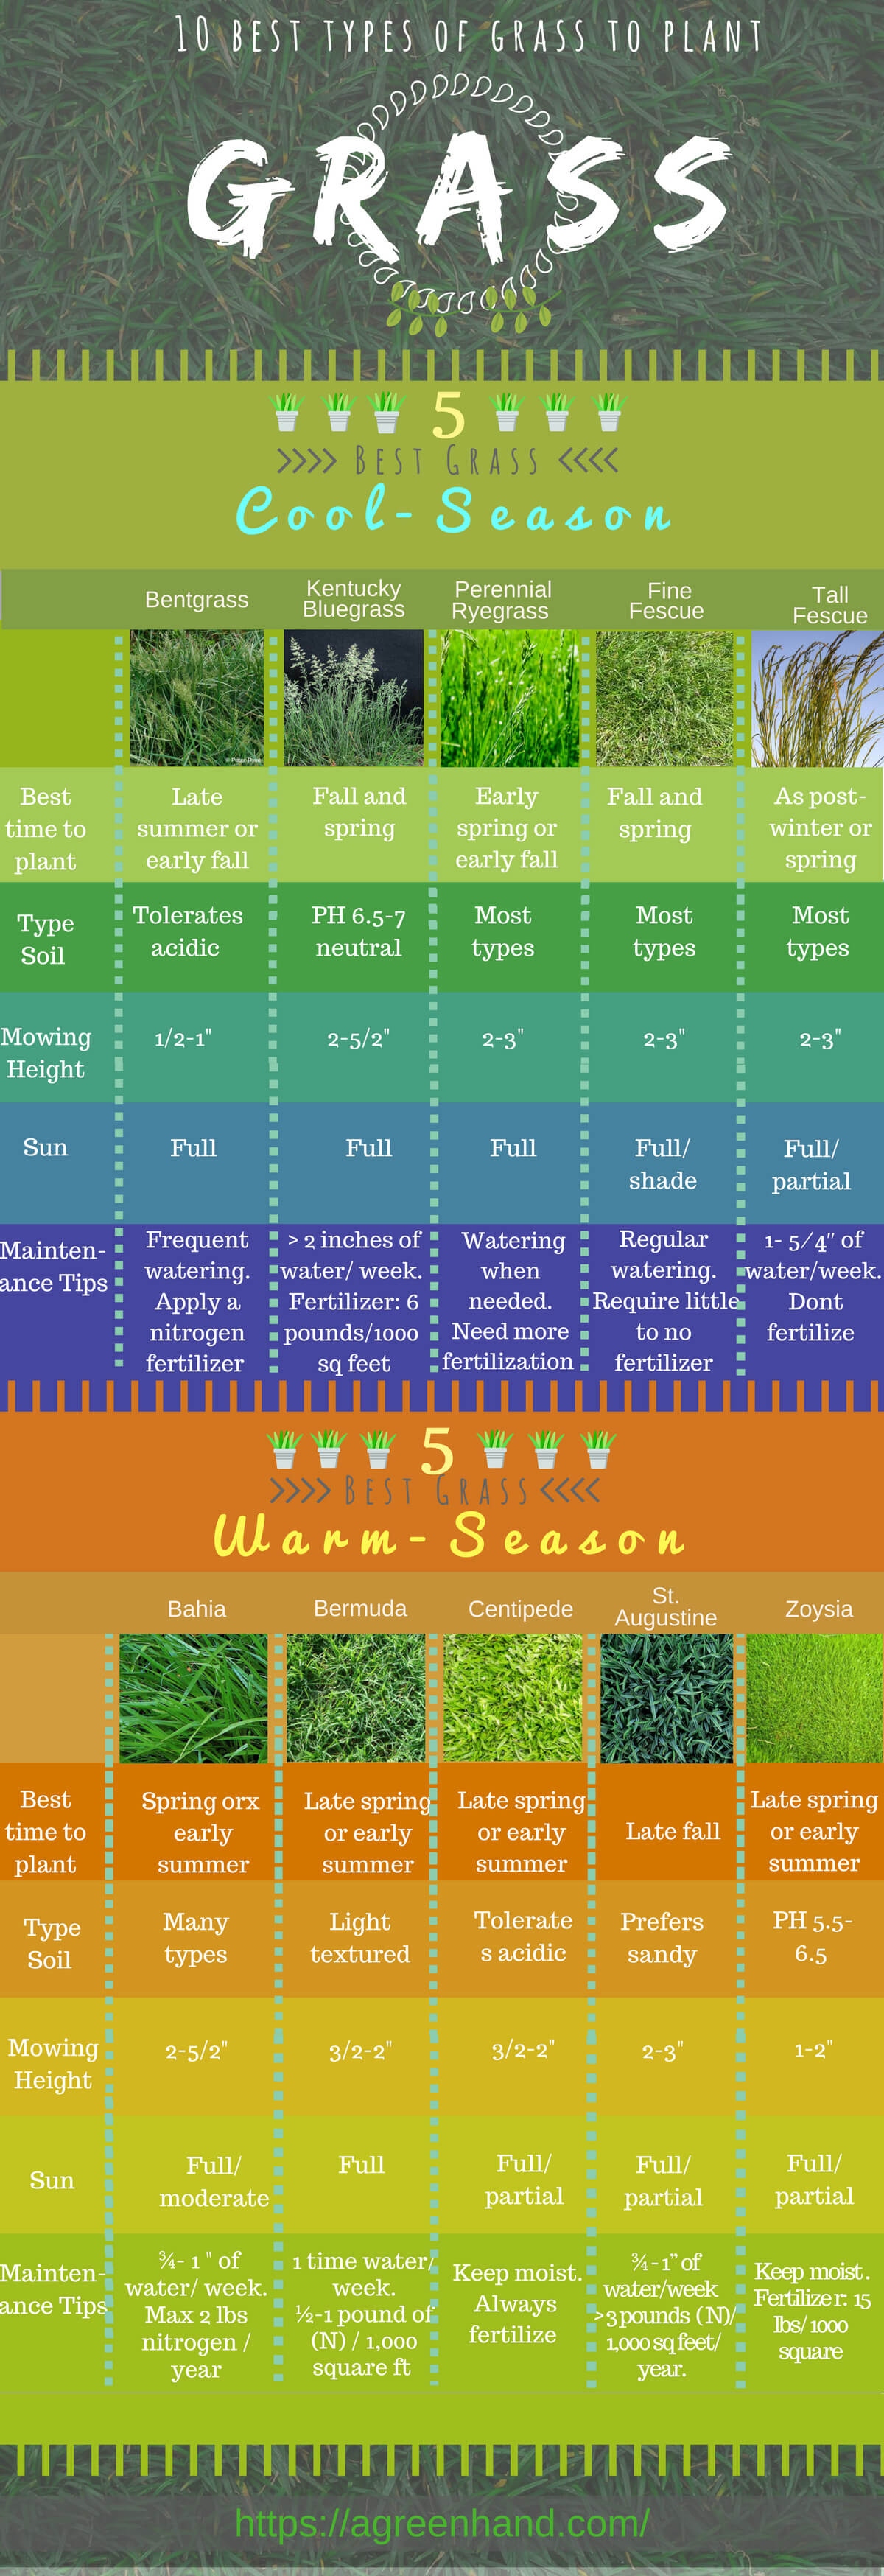 10 Popular Types Of Grasses To Plant In All Seasons Infographic